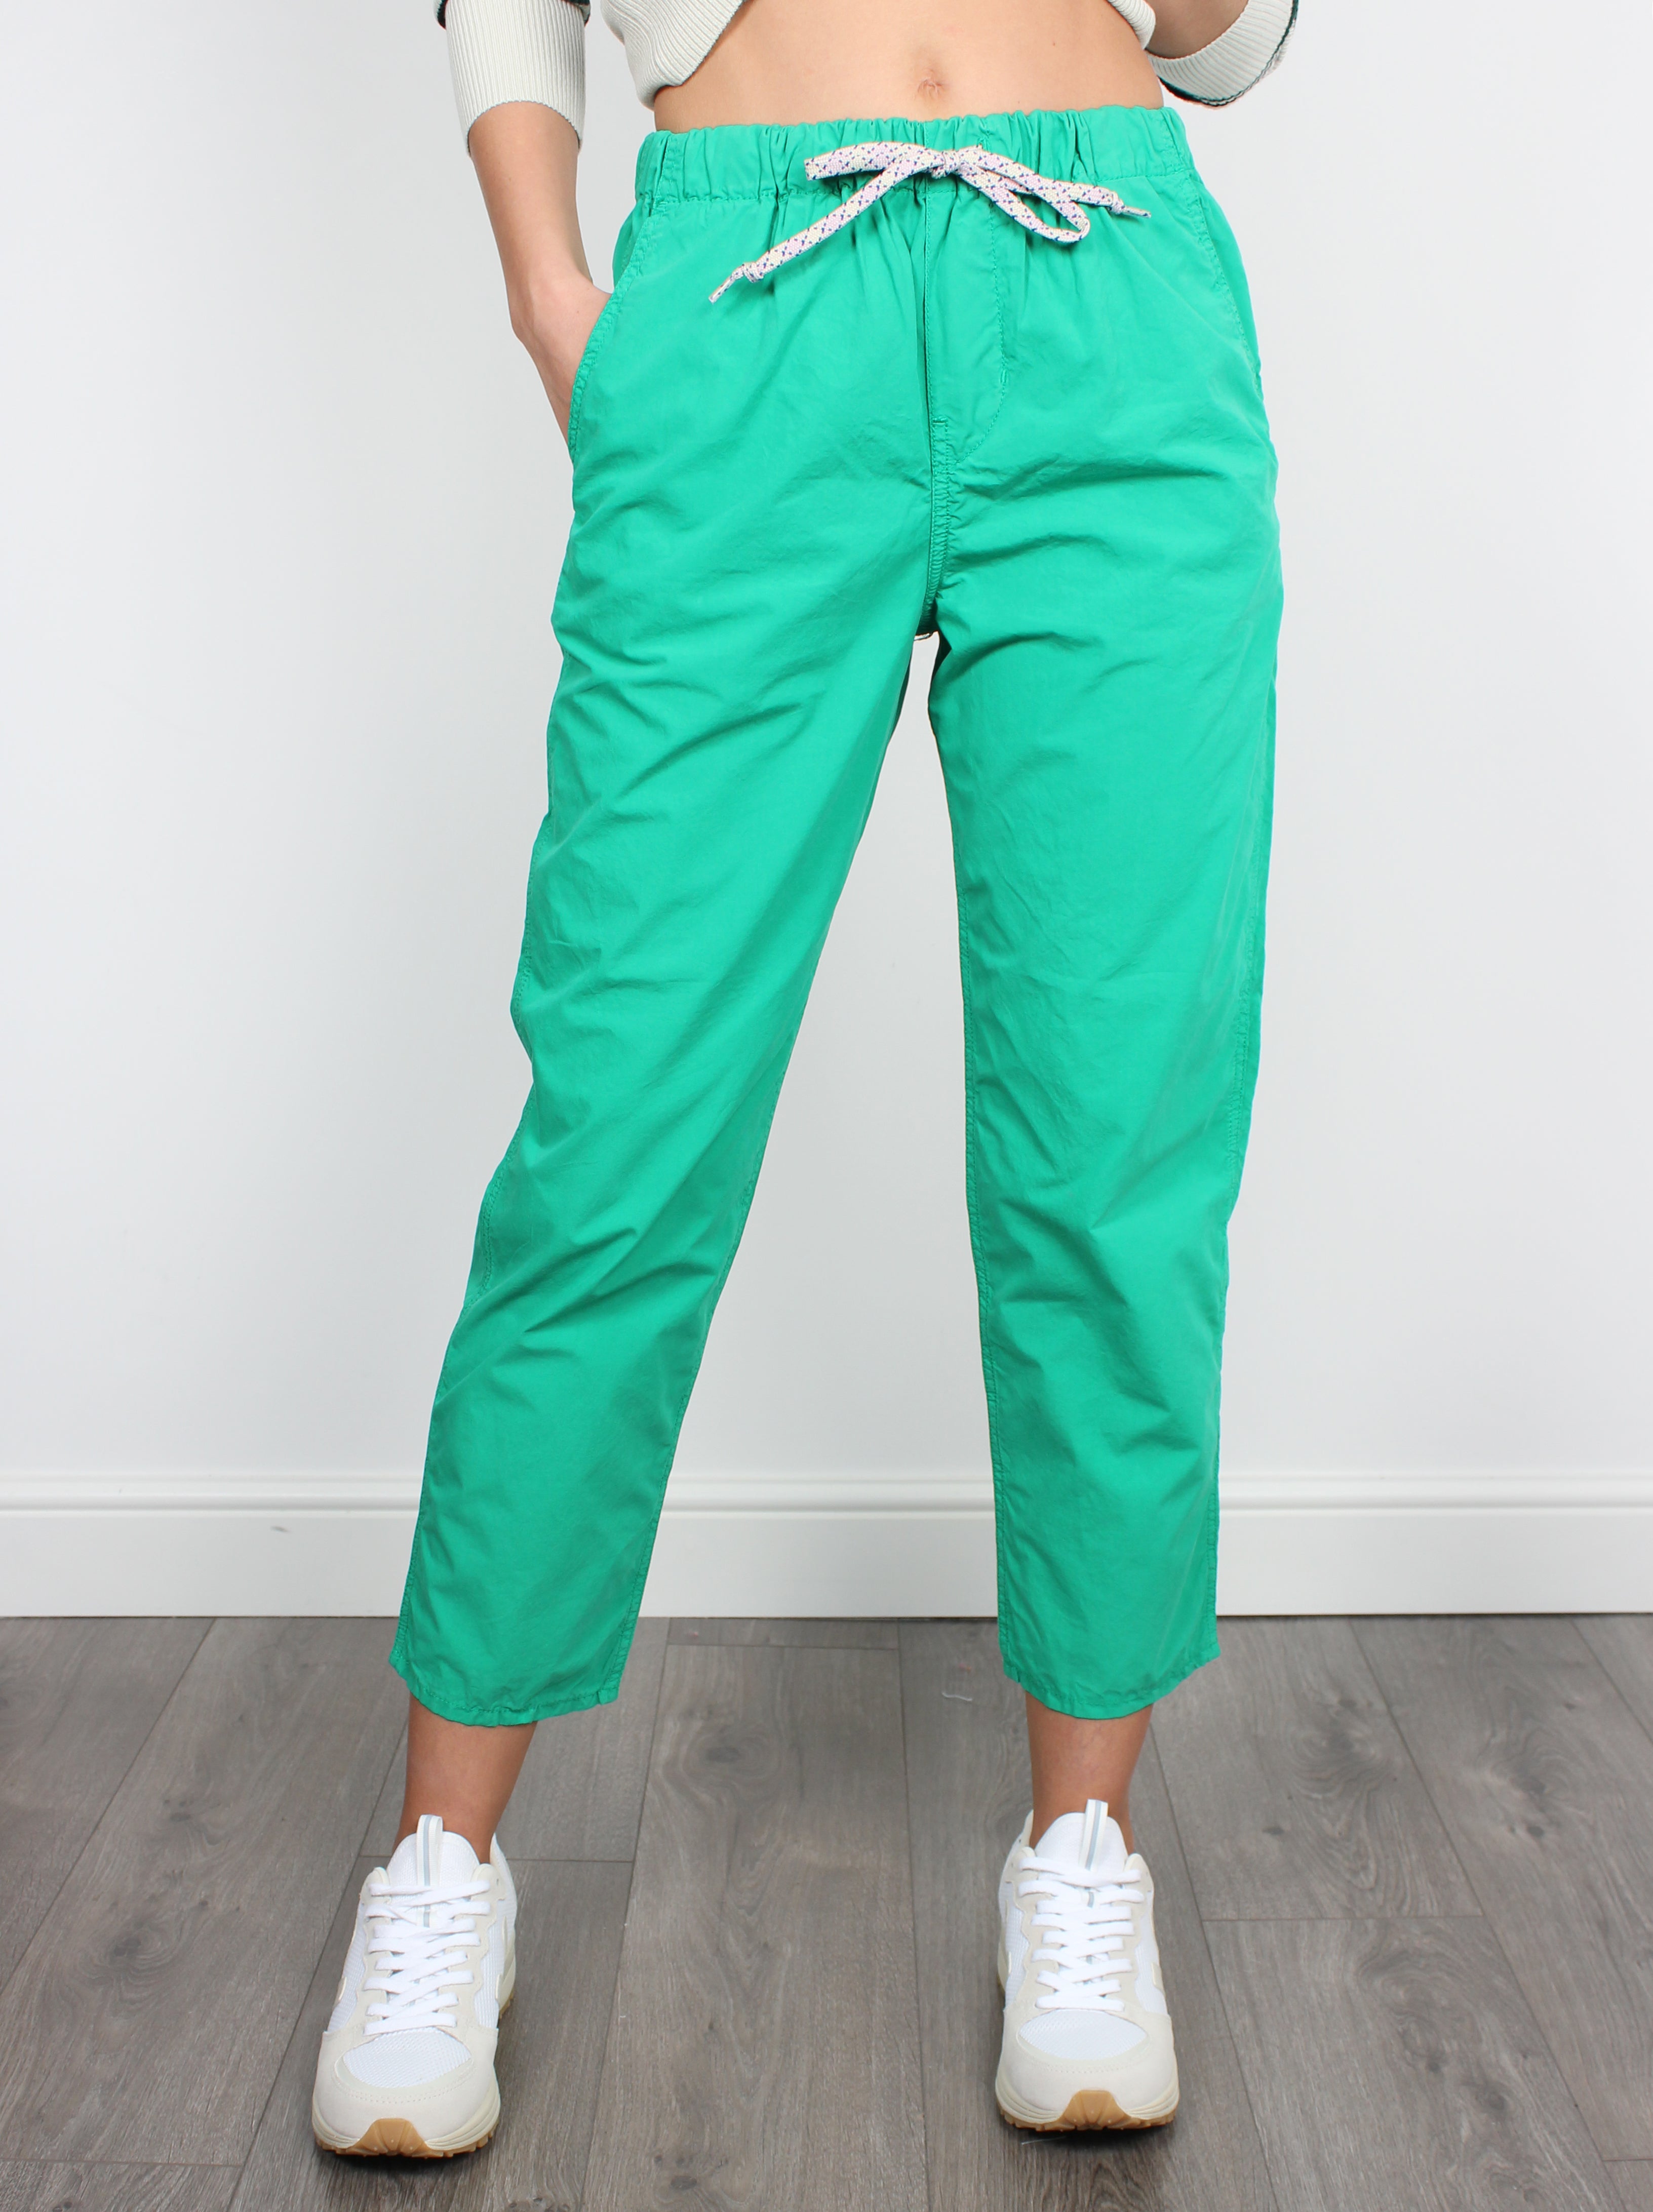 BR Pizzy Cotton Trousers in Emerald